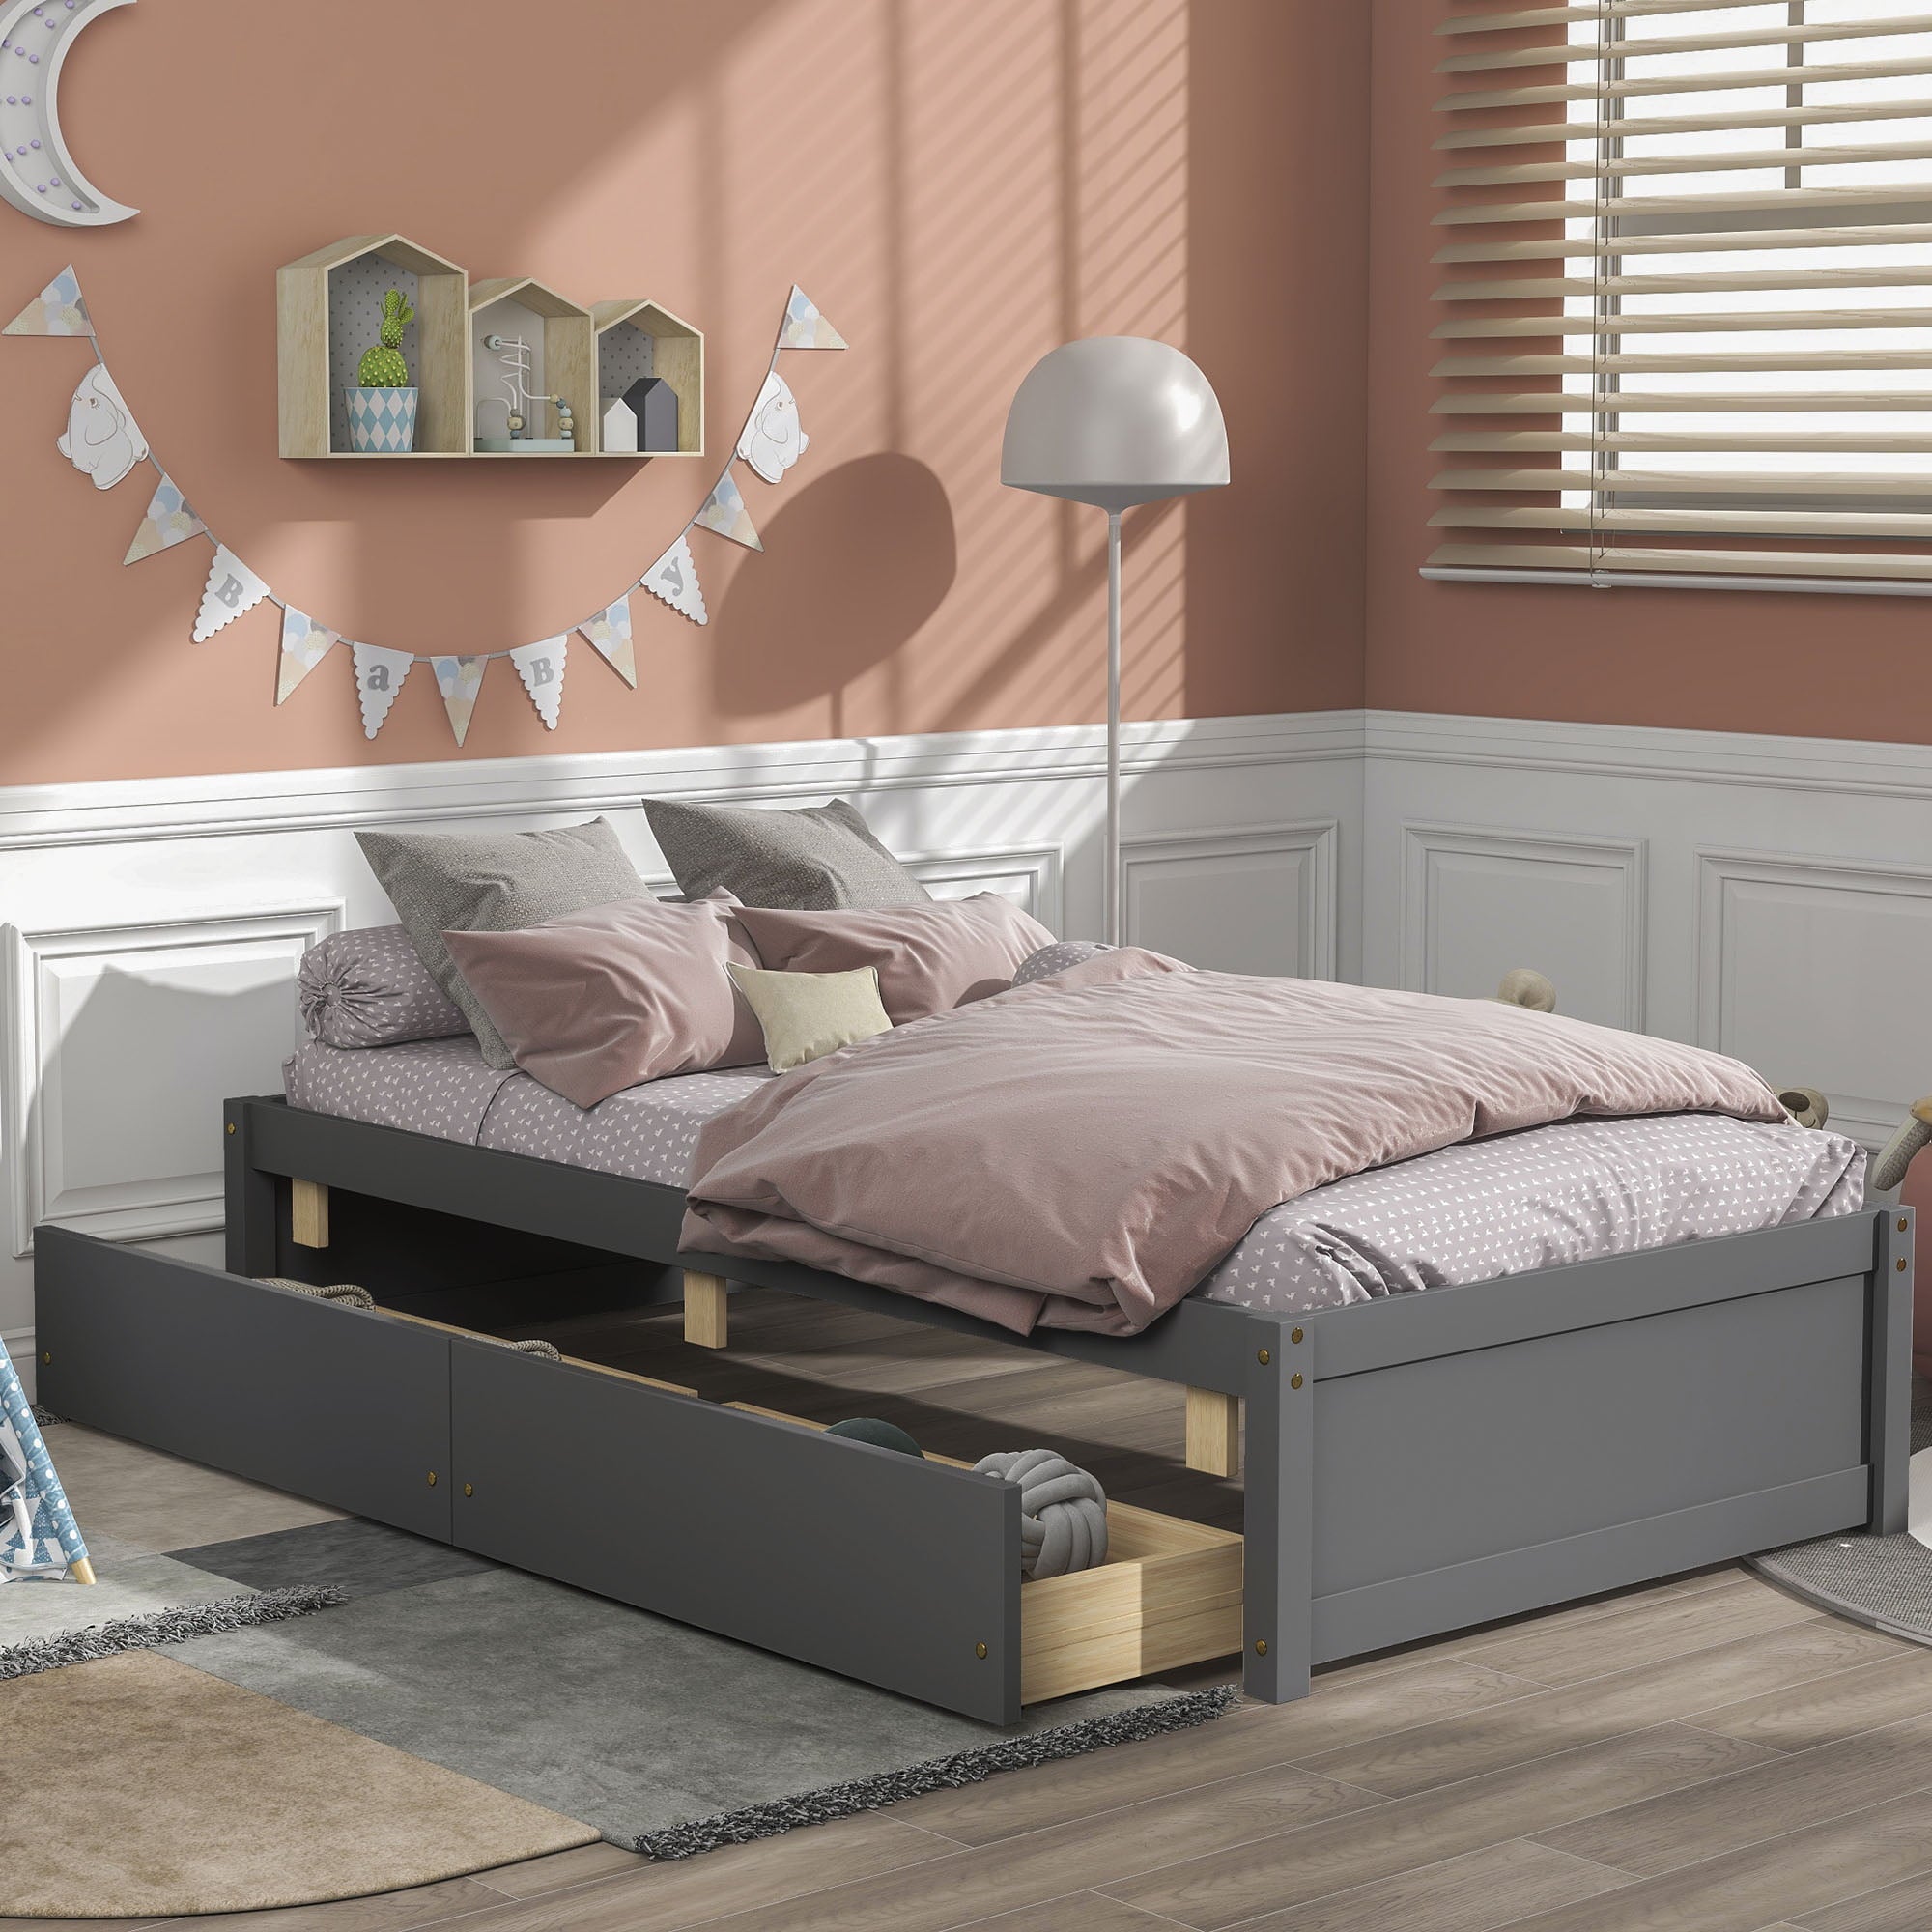 Platform Bed Frame with Storage Drawers, Kids Twin Size Bed Frame No Box Spring Needed, Solid Wood Platform Beds with Two Drawers, Modern Single Bed Bedroom Furniture, Gray, J1174